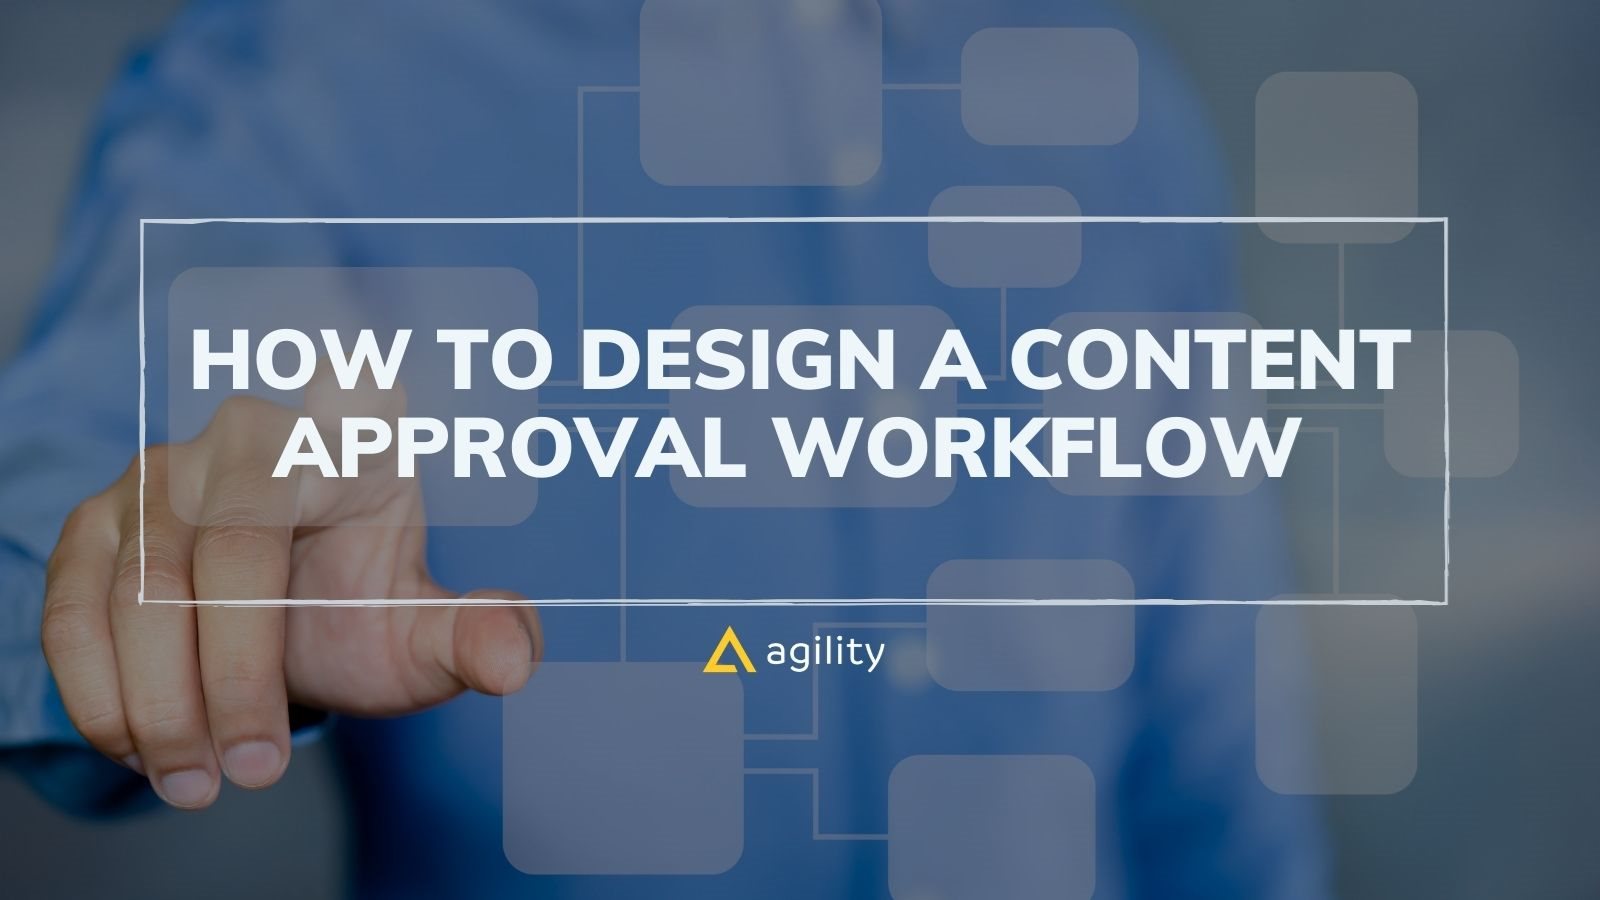 How to Design a Content Approval Workflow